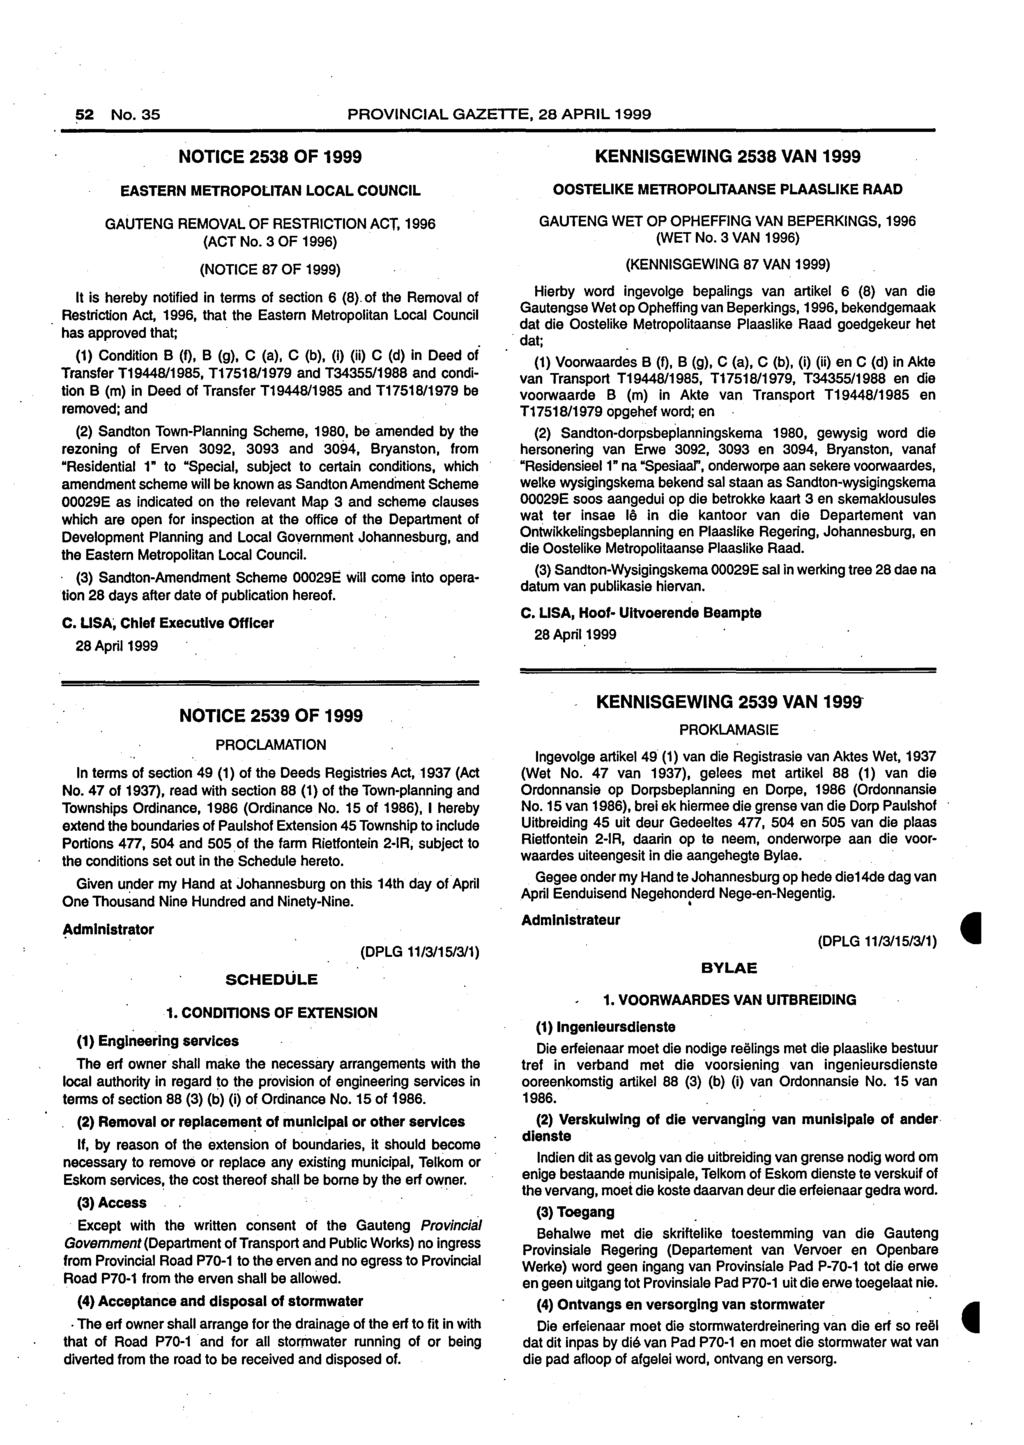 52 No.35 PROVINCIAL GAZElTE, 28 APRIL 1999 NOTICE 2538 OF 1999 EASTERN METROPOLITAN LOCAL COUNCIL GAUTENG REMOVAL OF RESTRICTION ACT, 1996 (ACT No.